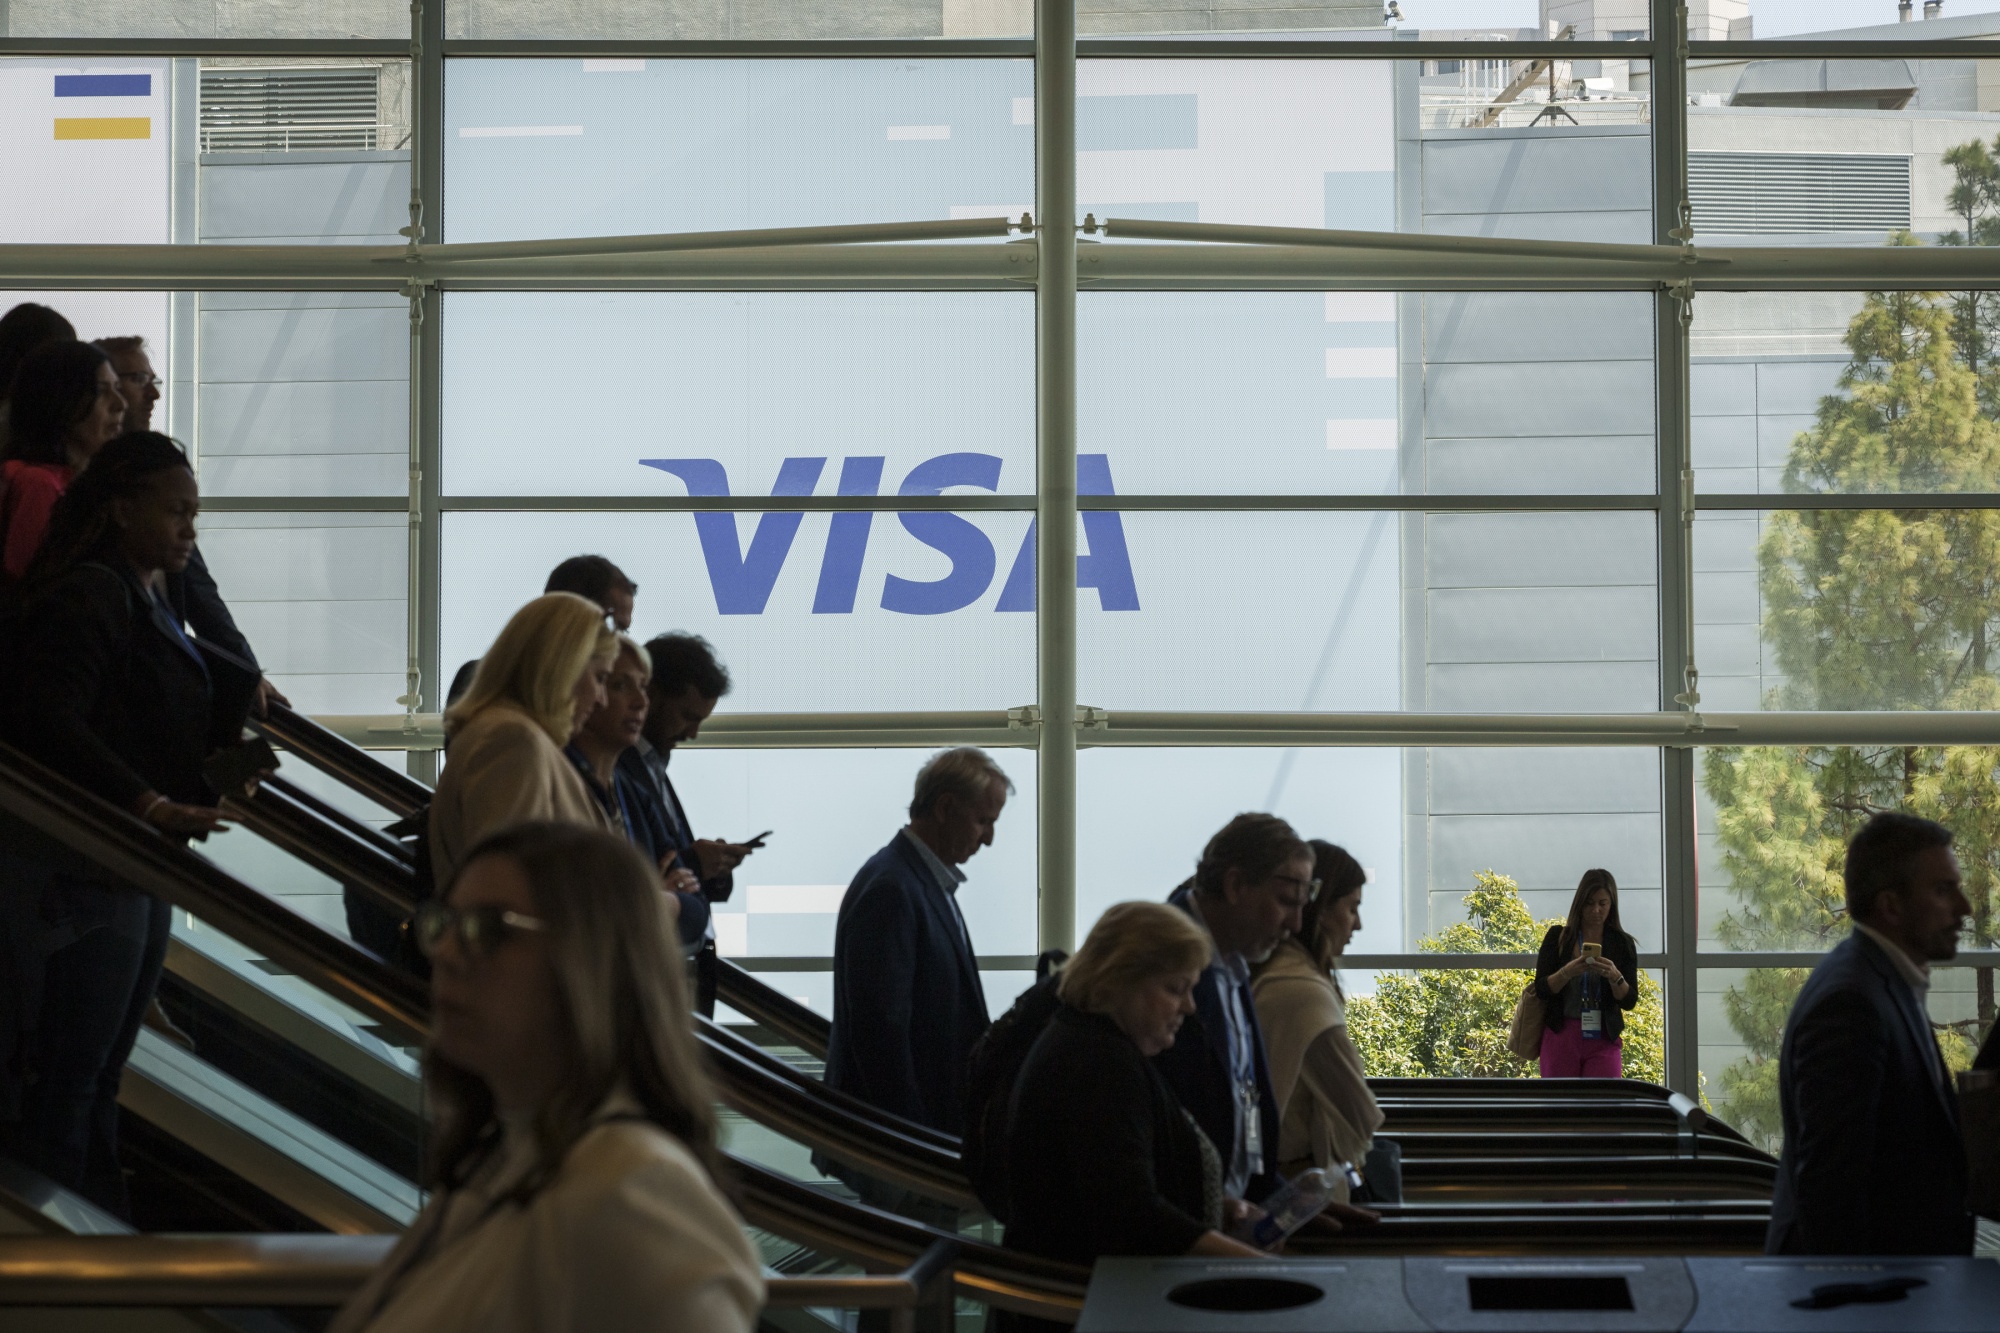 Visa Revolutionizes Payments: One Card for All Your Accounts Coming to the U.S. This Year